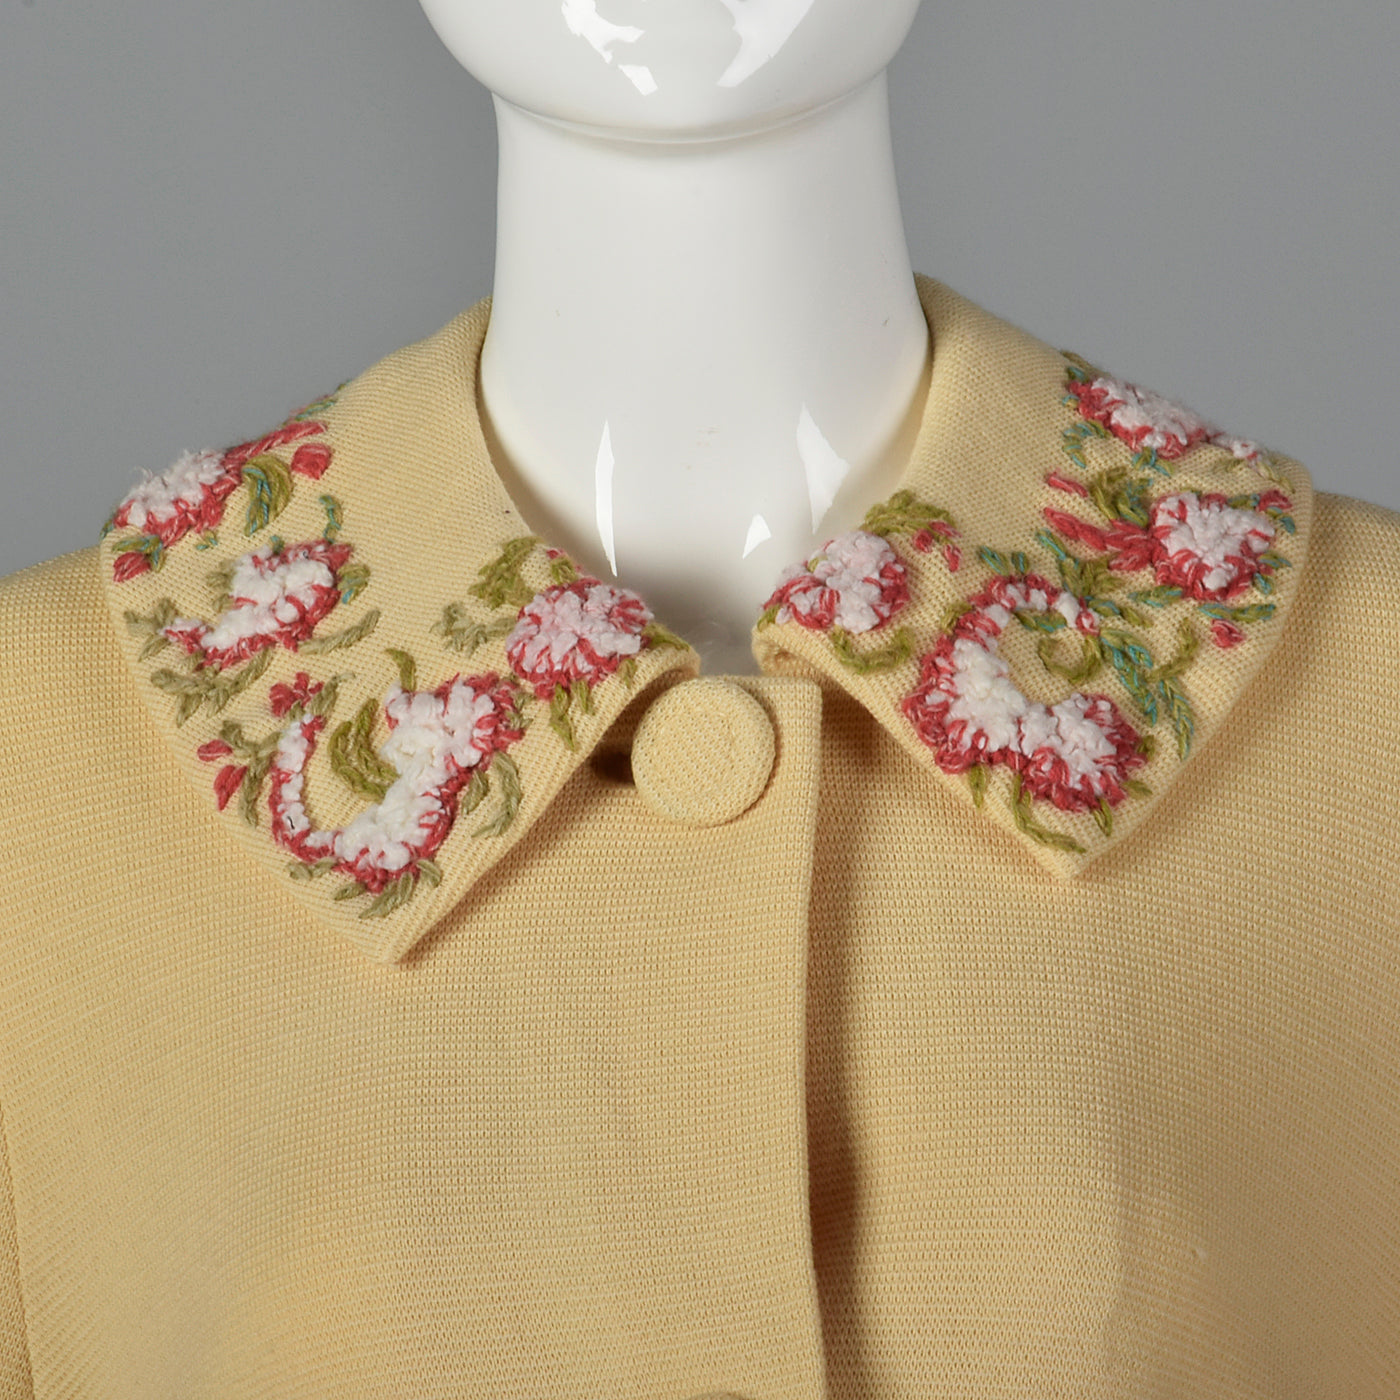 1960s Cream Knit Coat with Floral Embroidery Trim